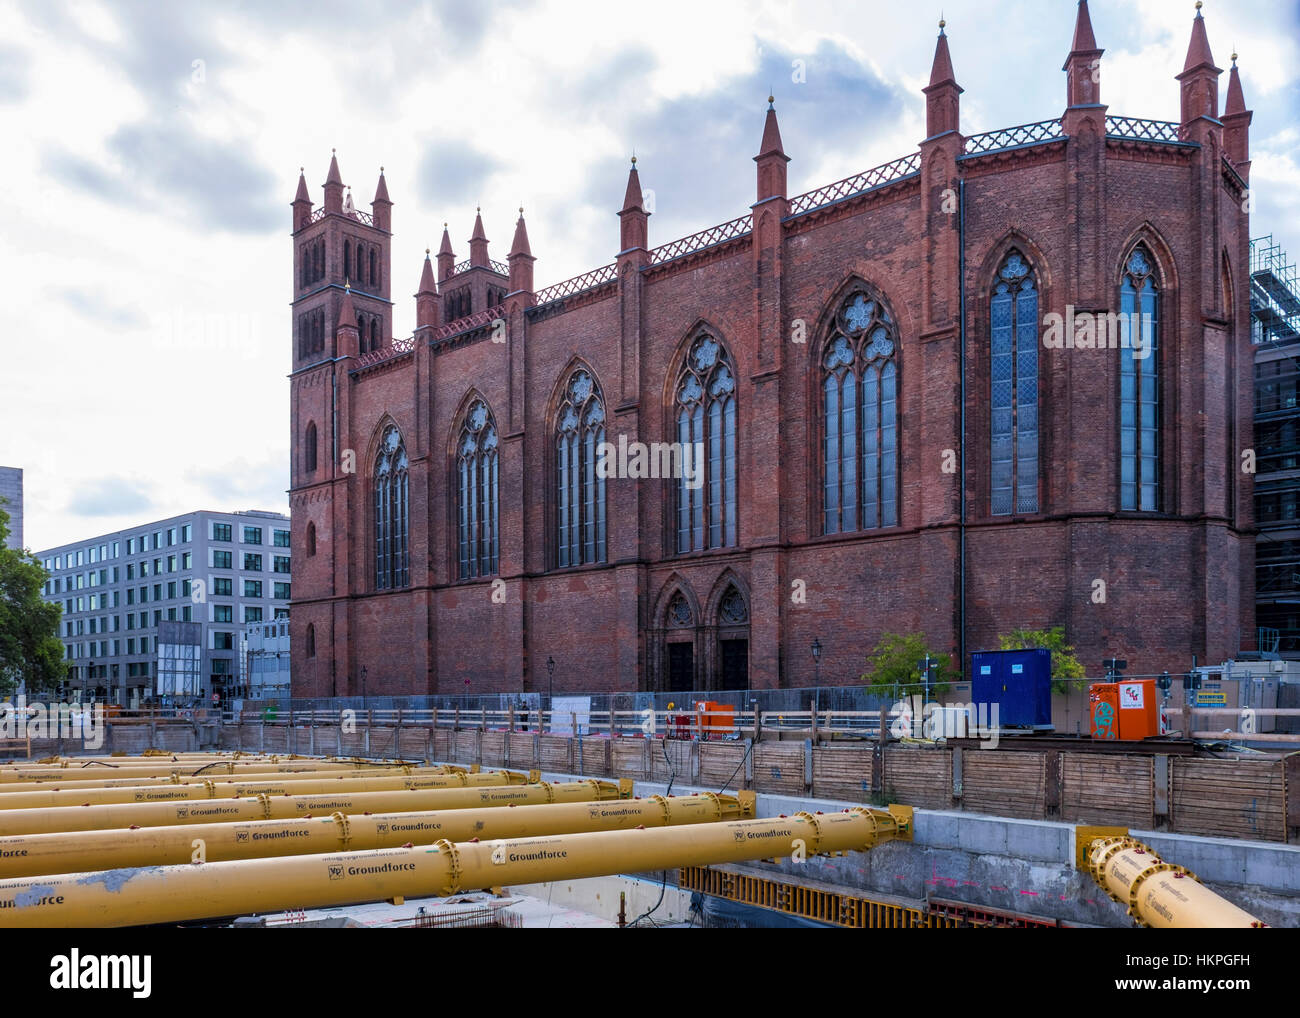 Berlin, Mitte. The beautiful Neo-gothic Friedrichswerder Church is closed as result of new building works around it. Poor city planning. Stock Photo